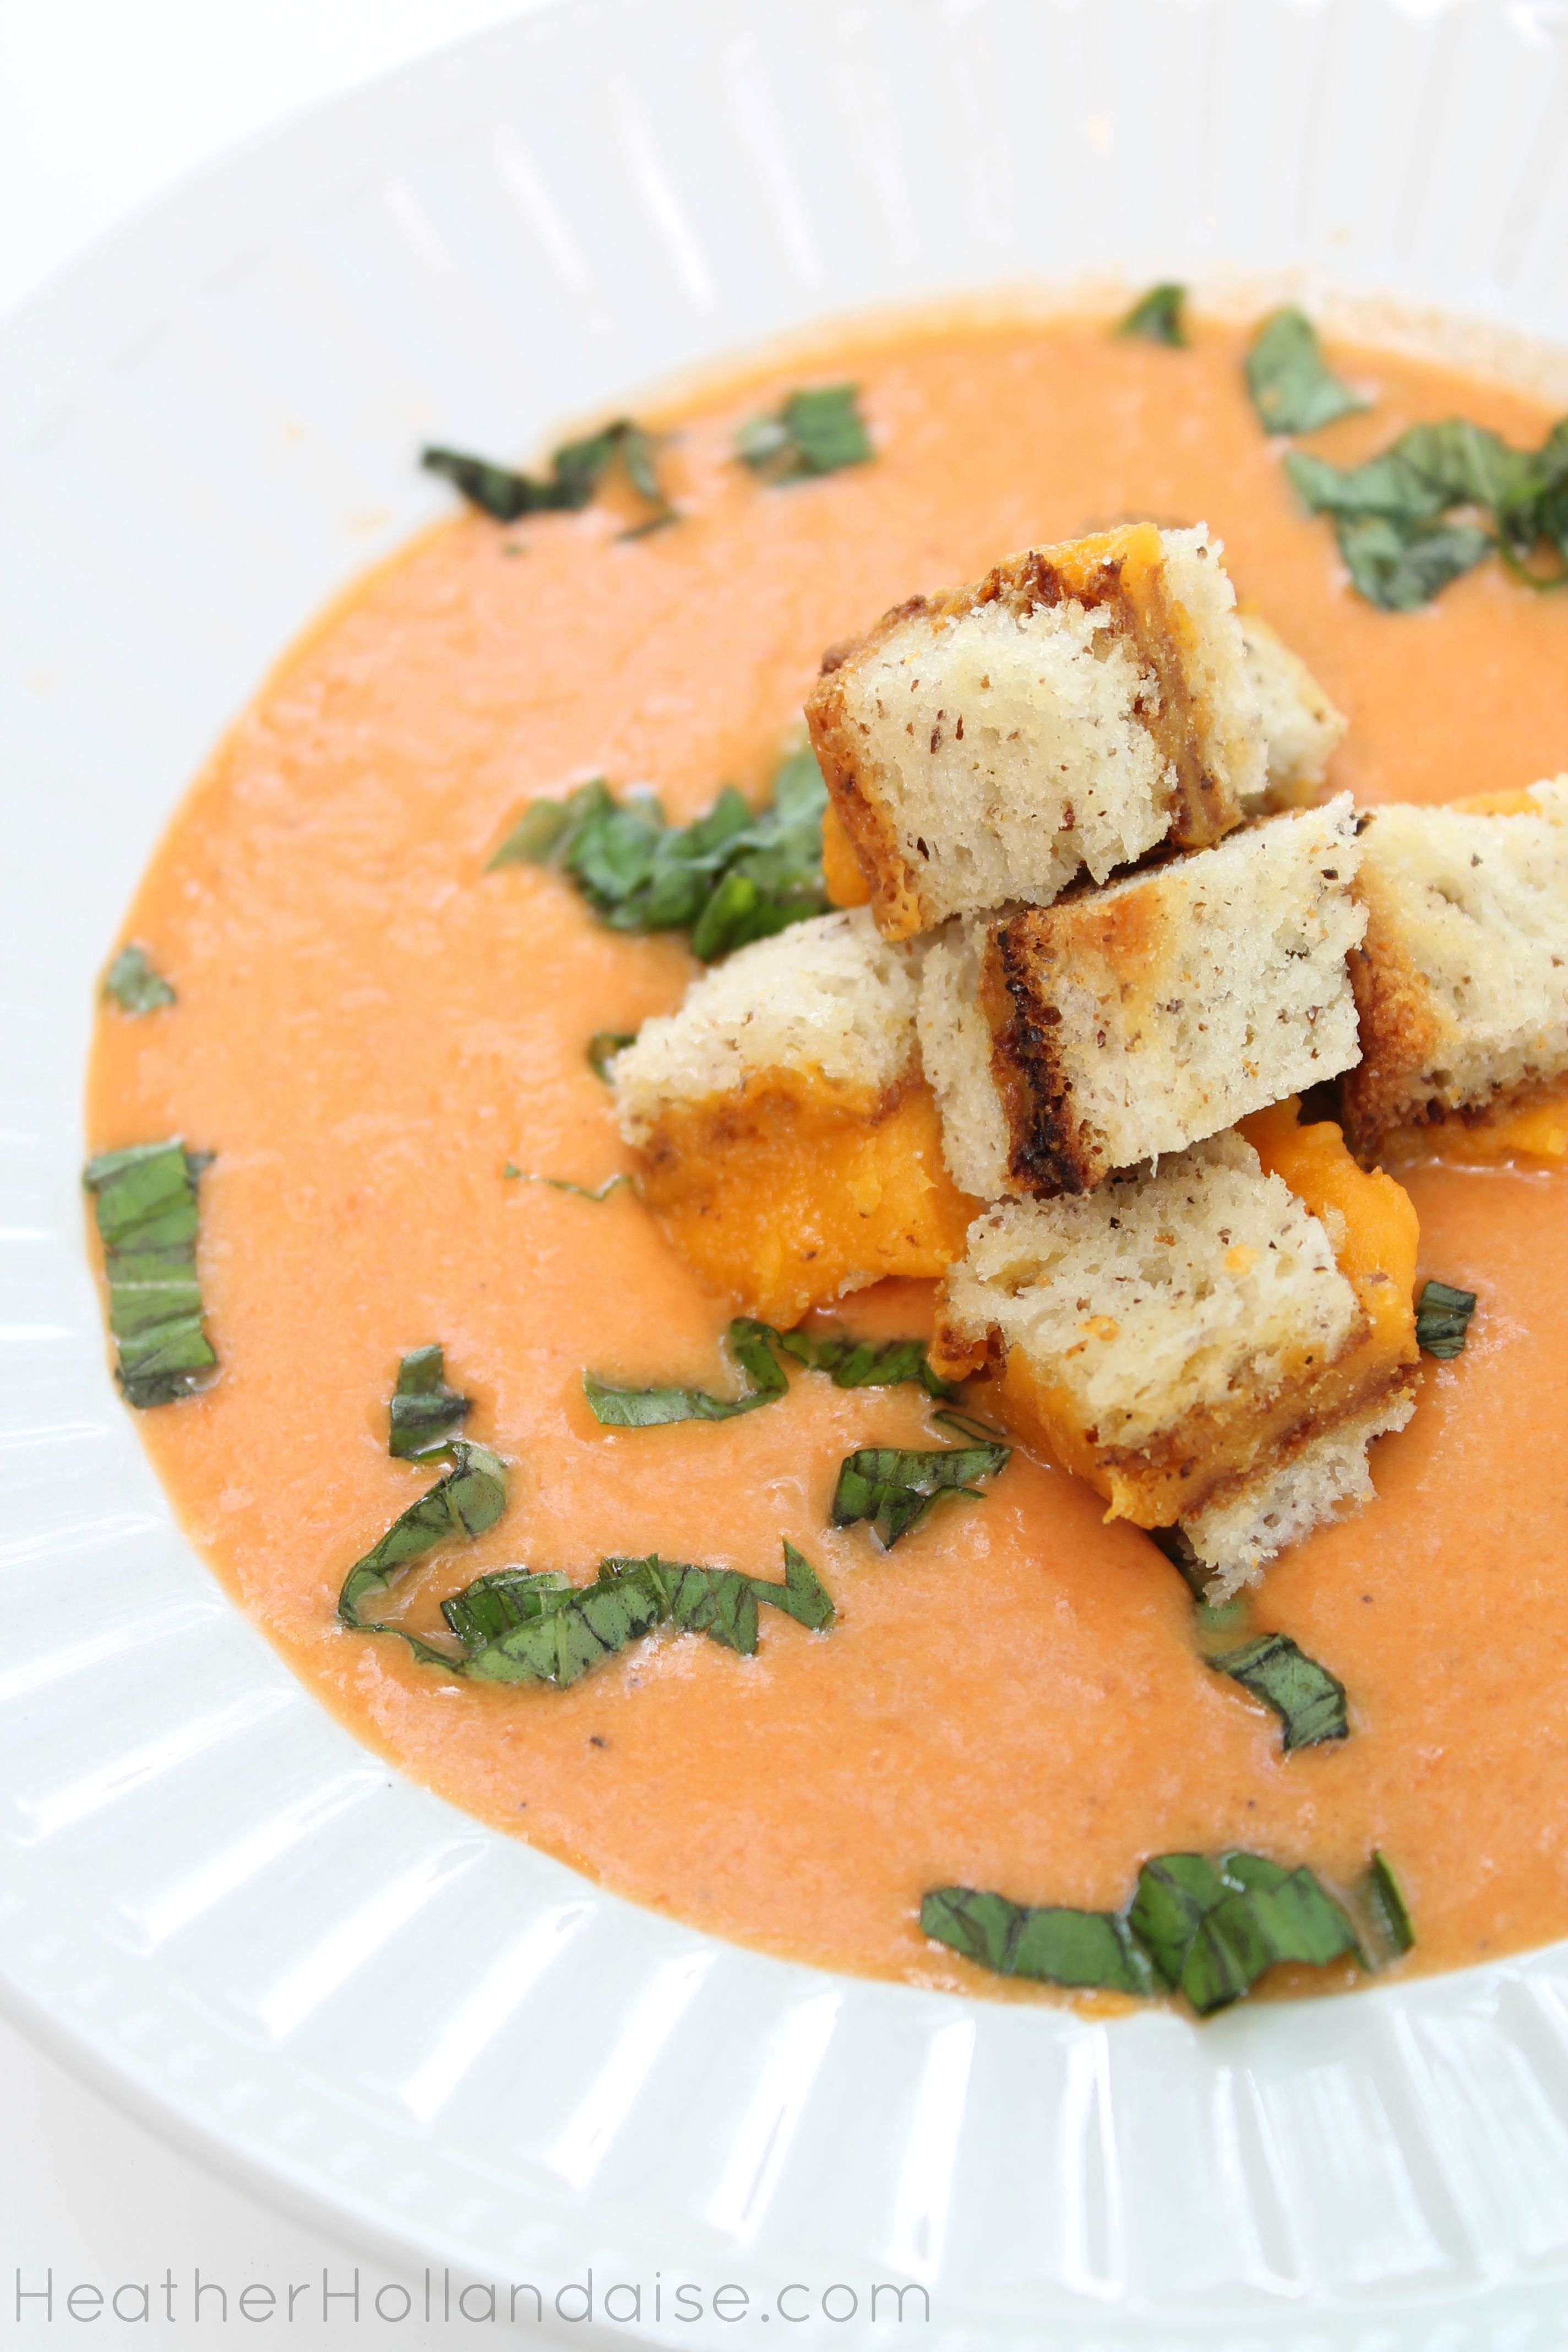 Paleo Tomato Basil Soup with grilled cheese croutons